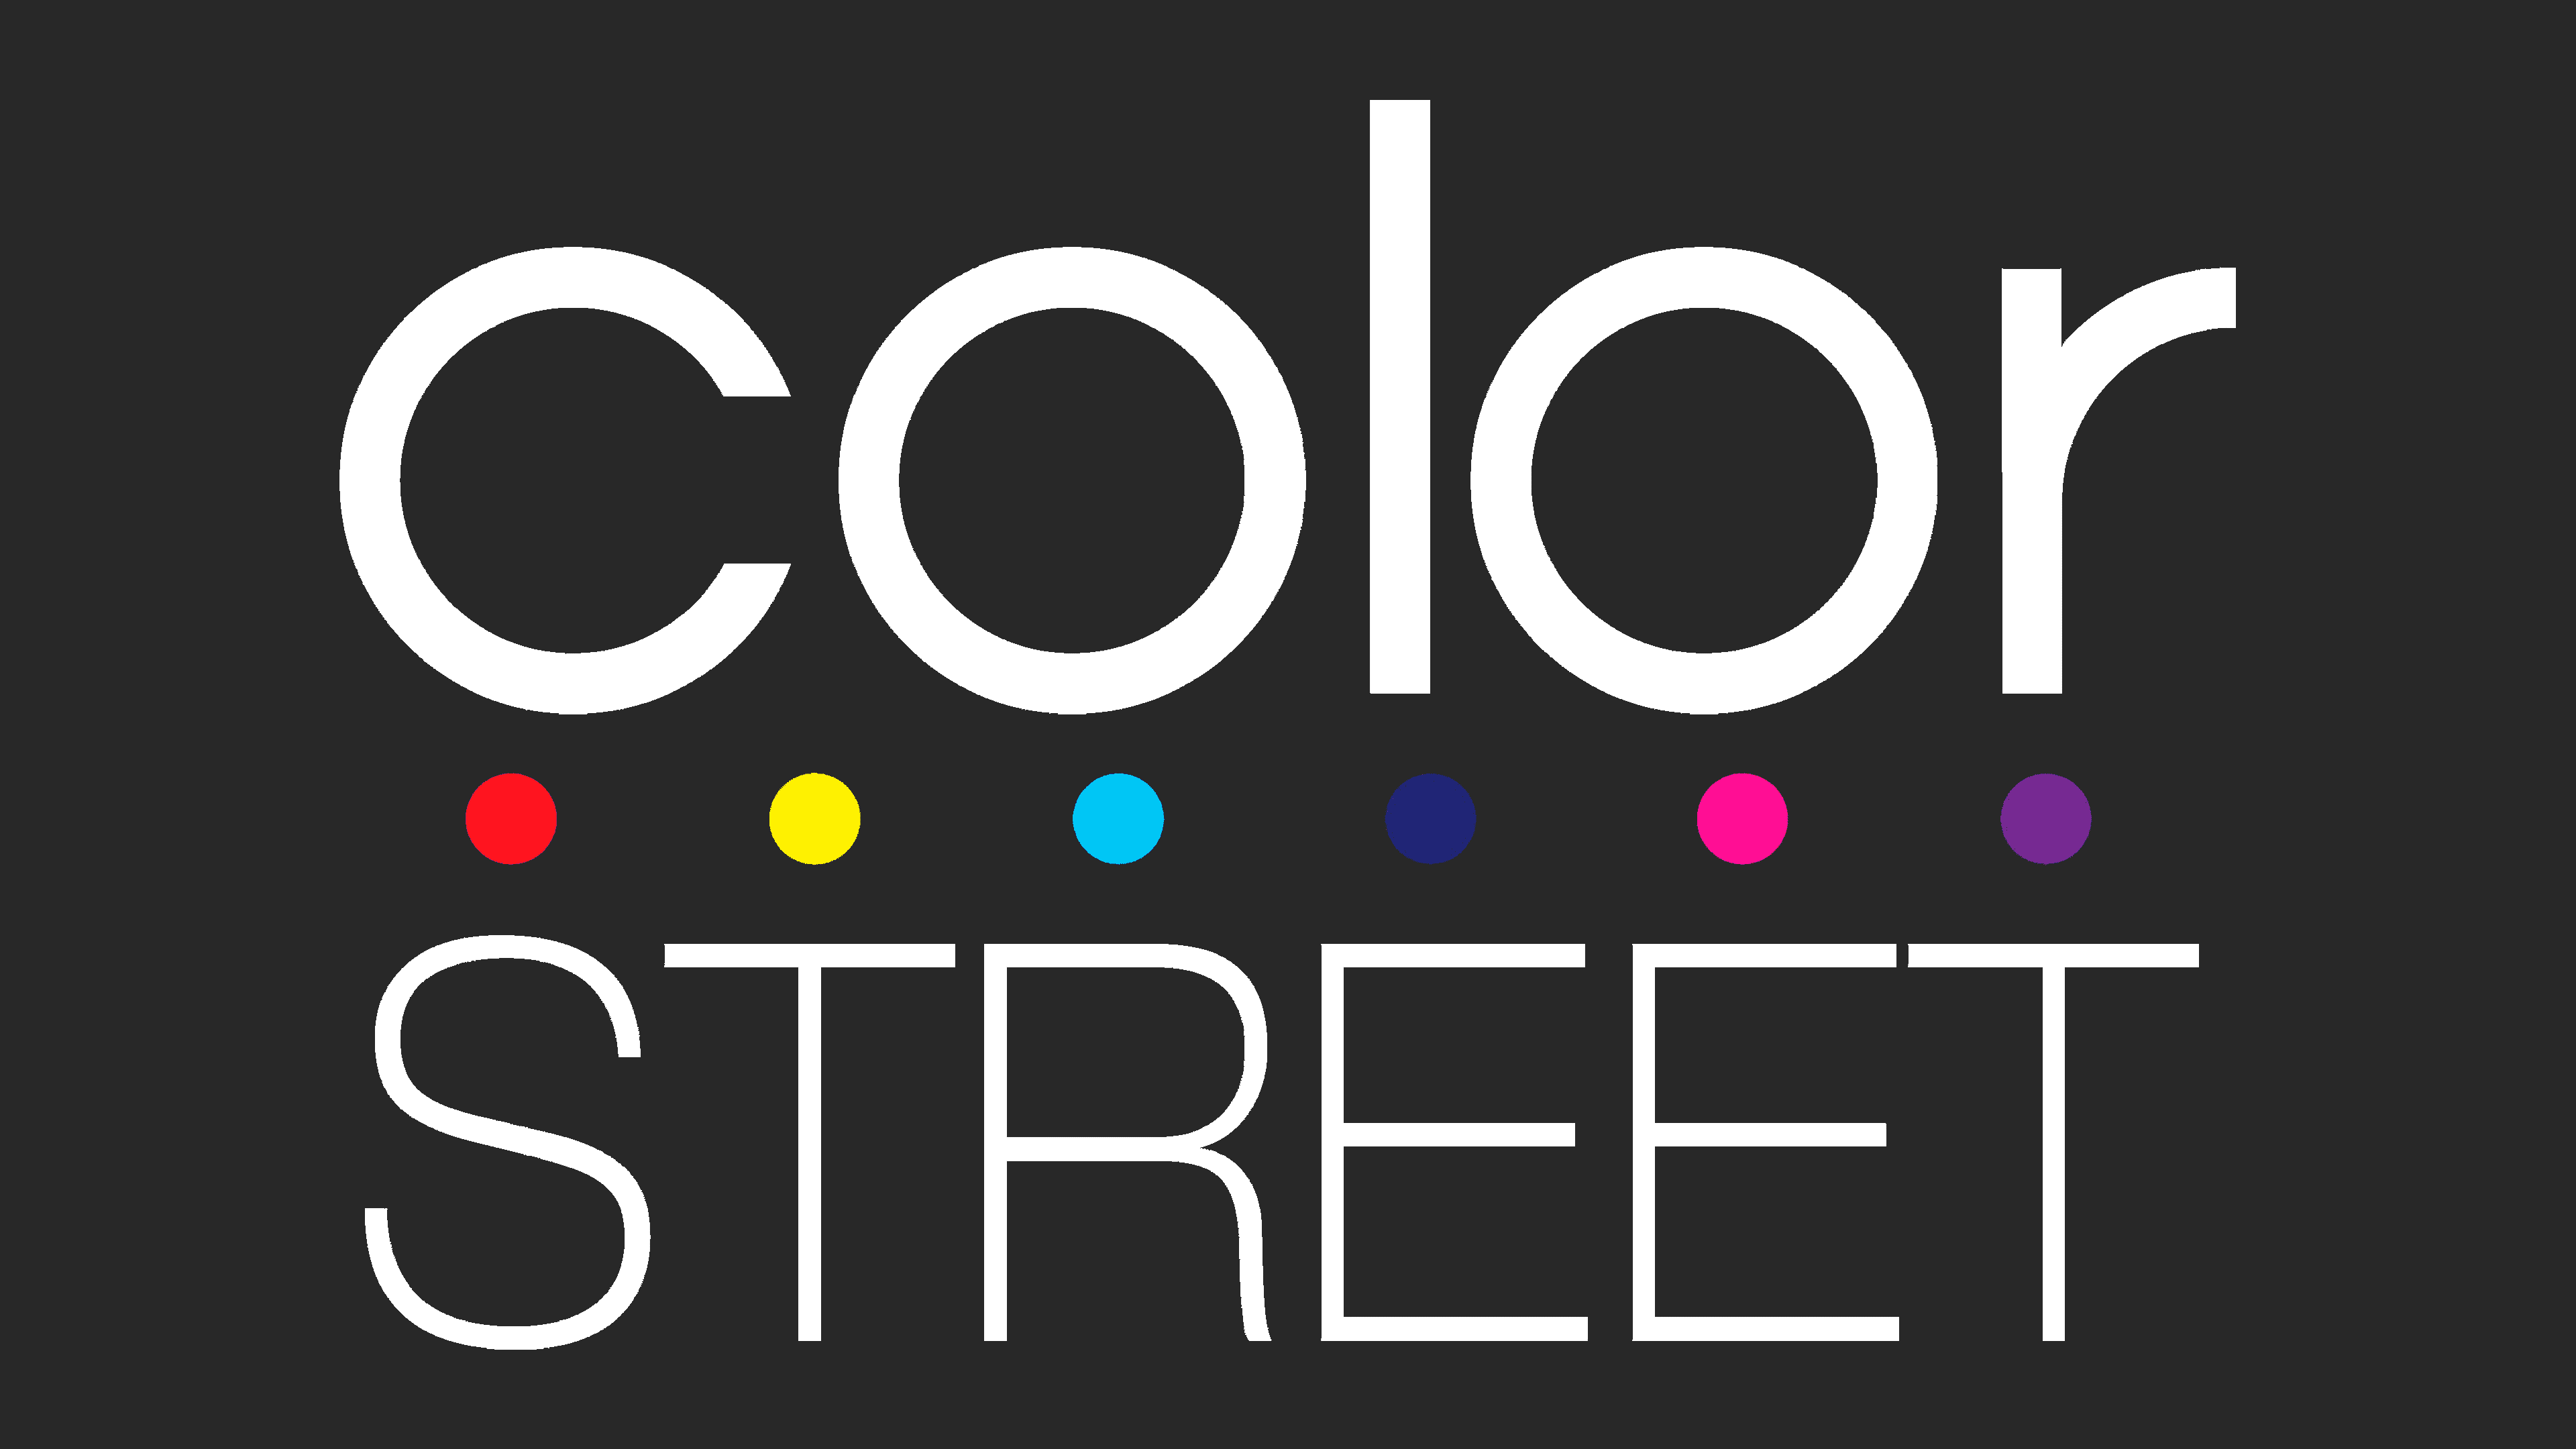 What is Color Street? Everything You Need to Know! - EyeLoveKnots